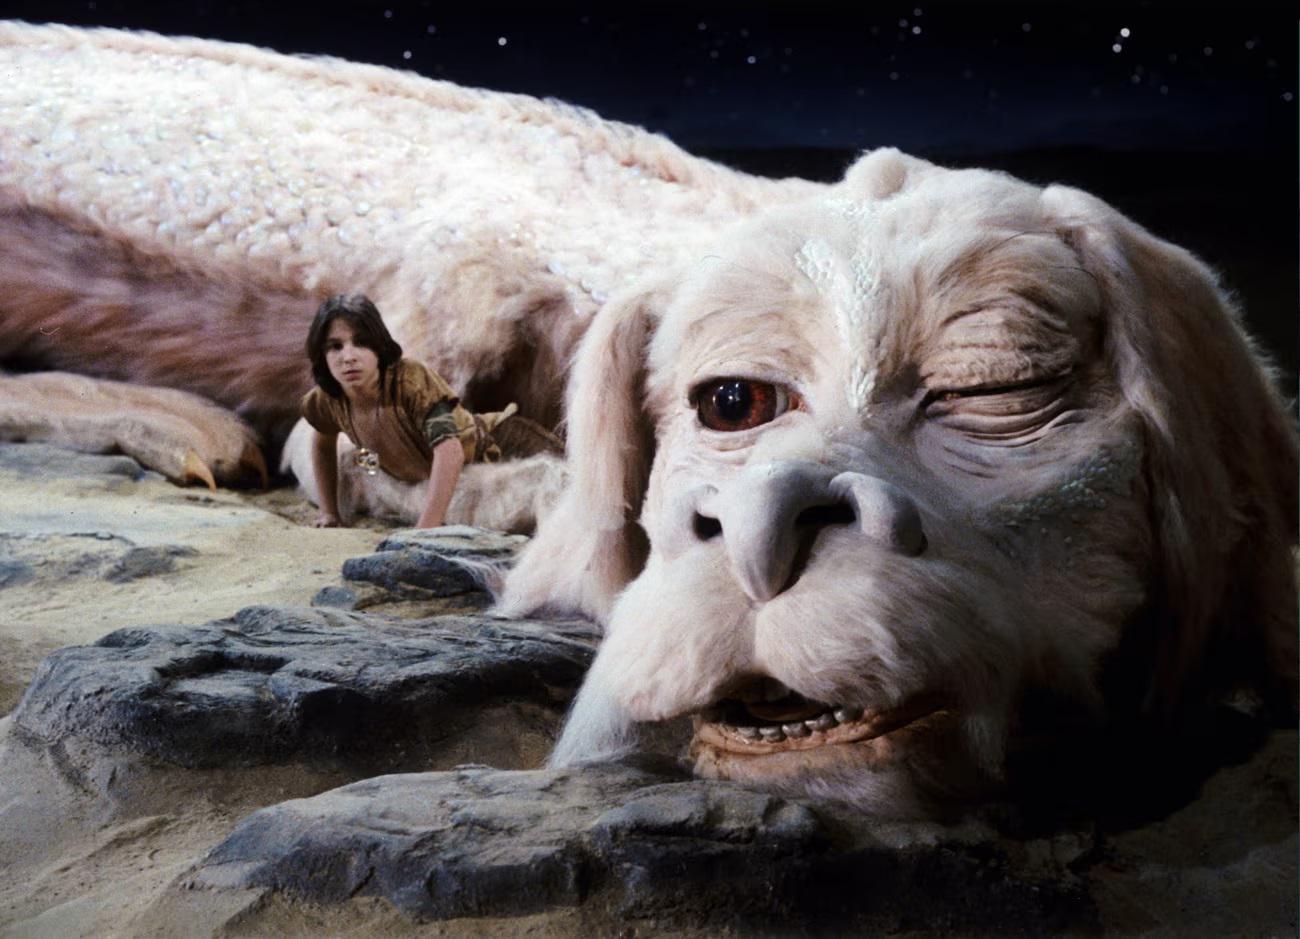 r/shittymoviedetails - The movie "The Never Ending Story" was released in 1984 which means its current runtime is about 350,000 hrs.